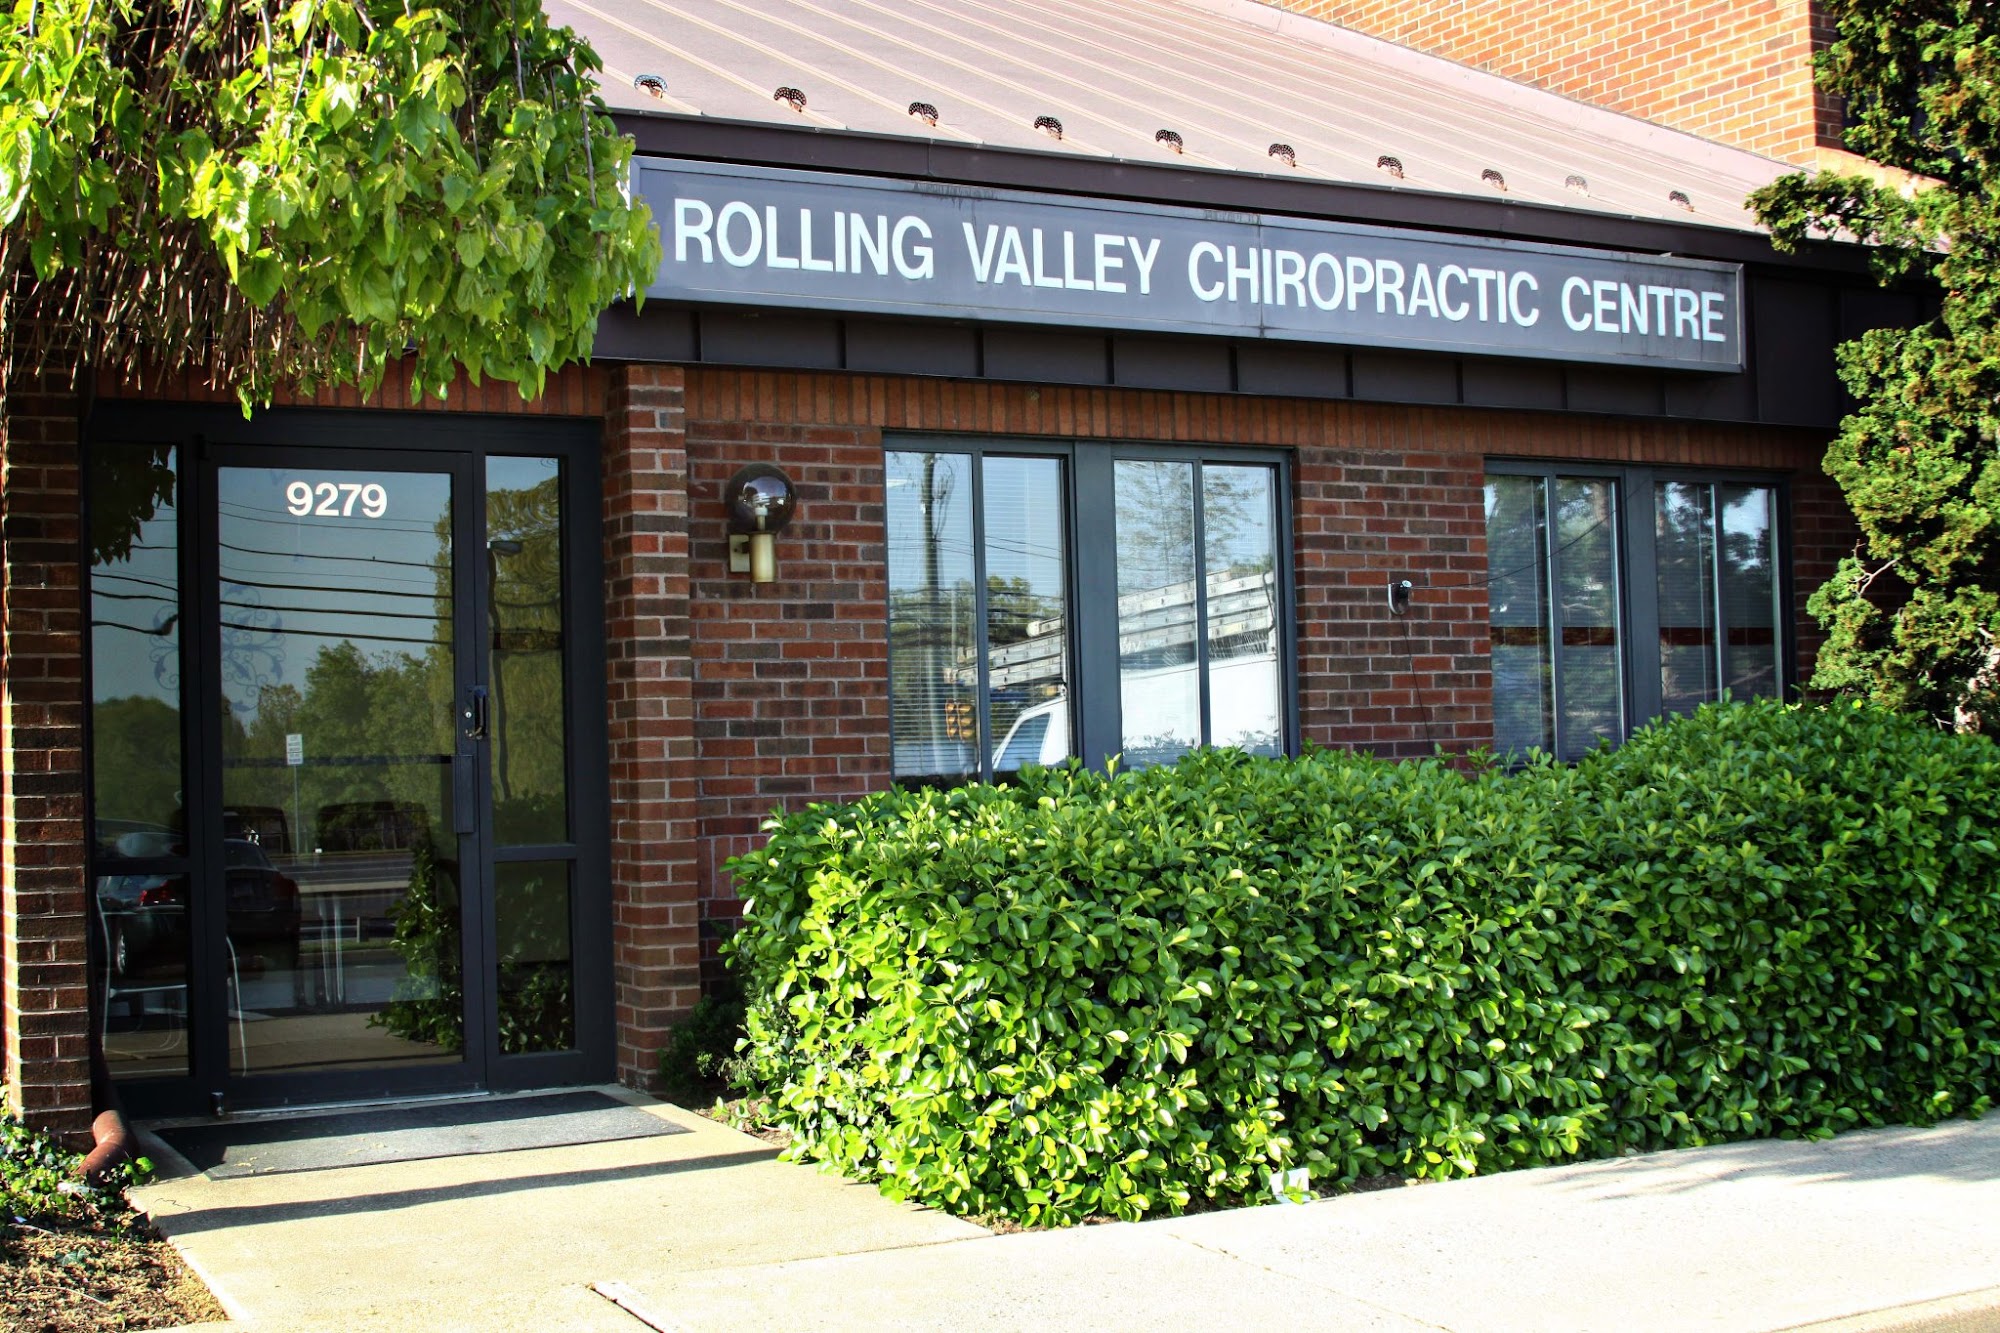 Rolling Valley Chiropractic Centre